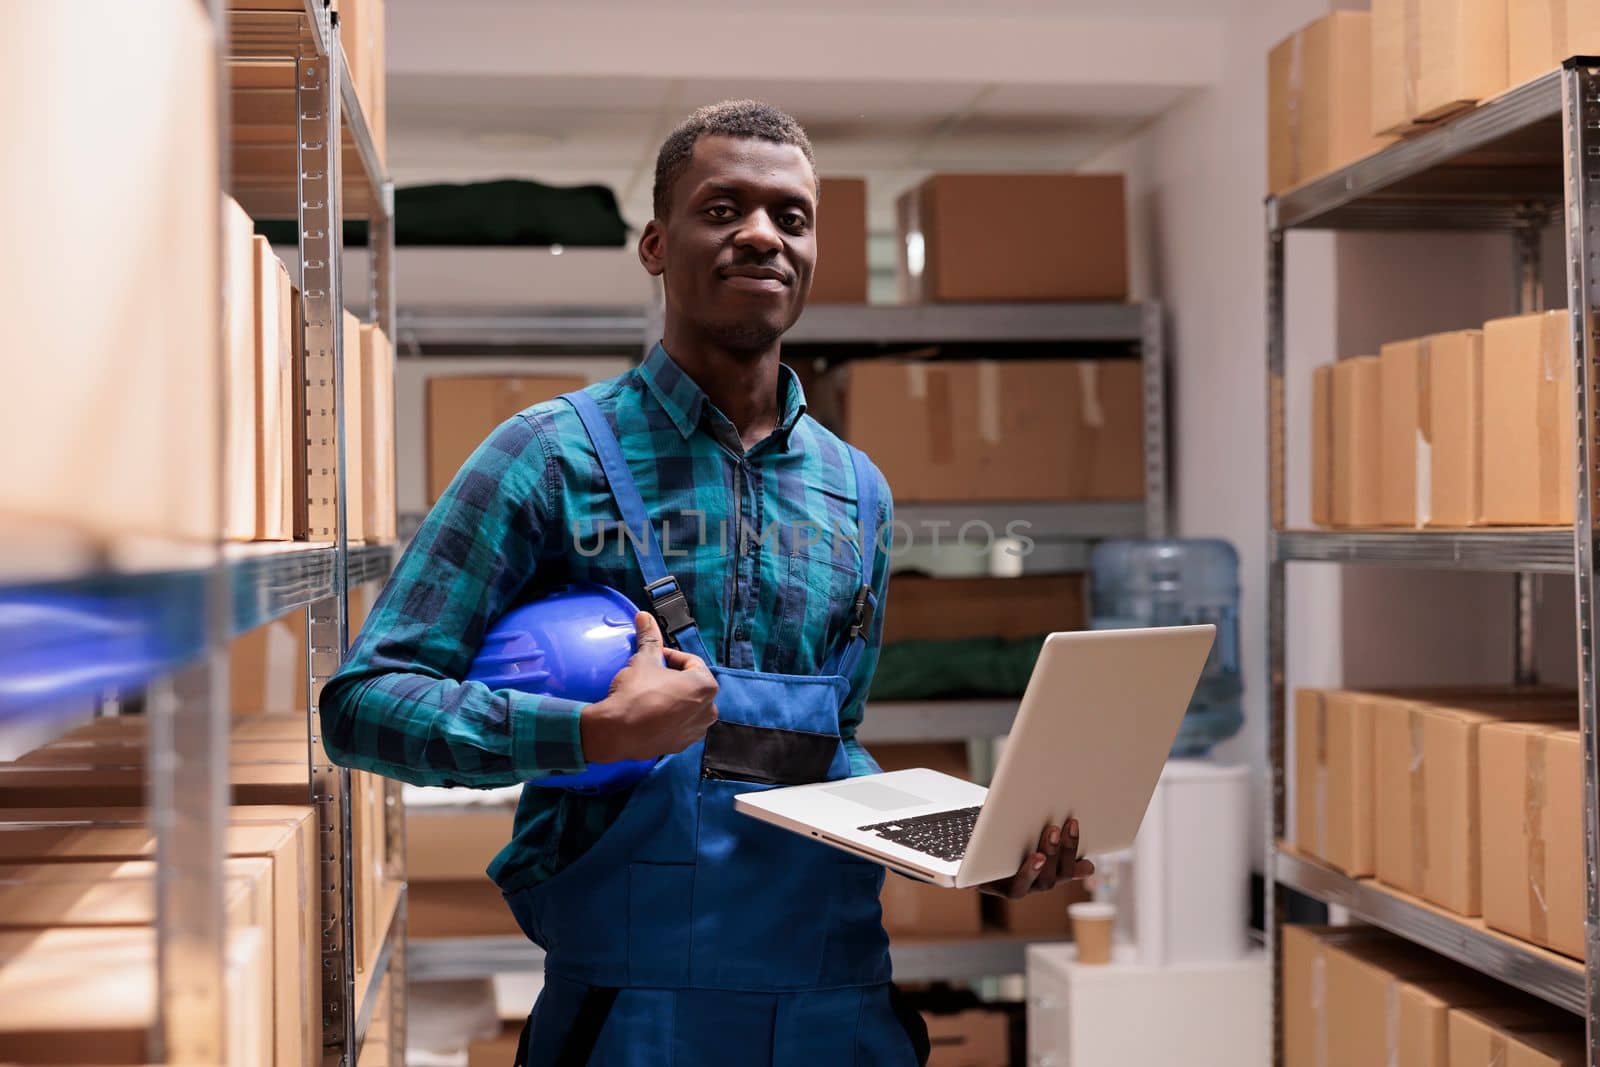 Warehouse employee doing inventory management using laptop, checking parcels before transportation and looking at camera. Smiling african american storehouse worker portrait